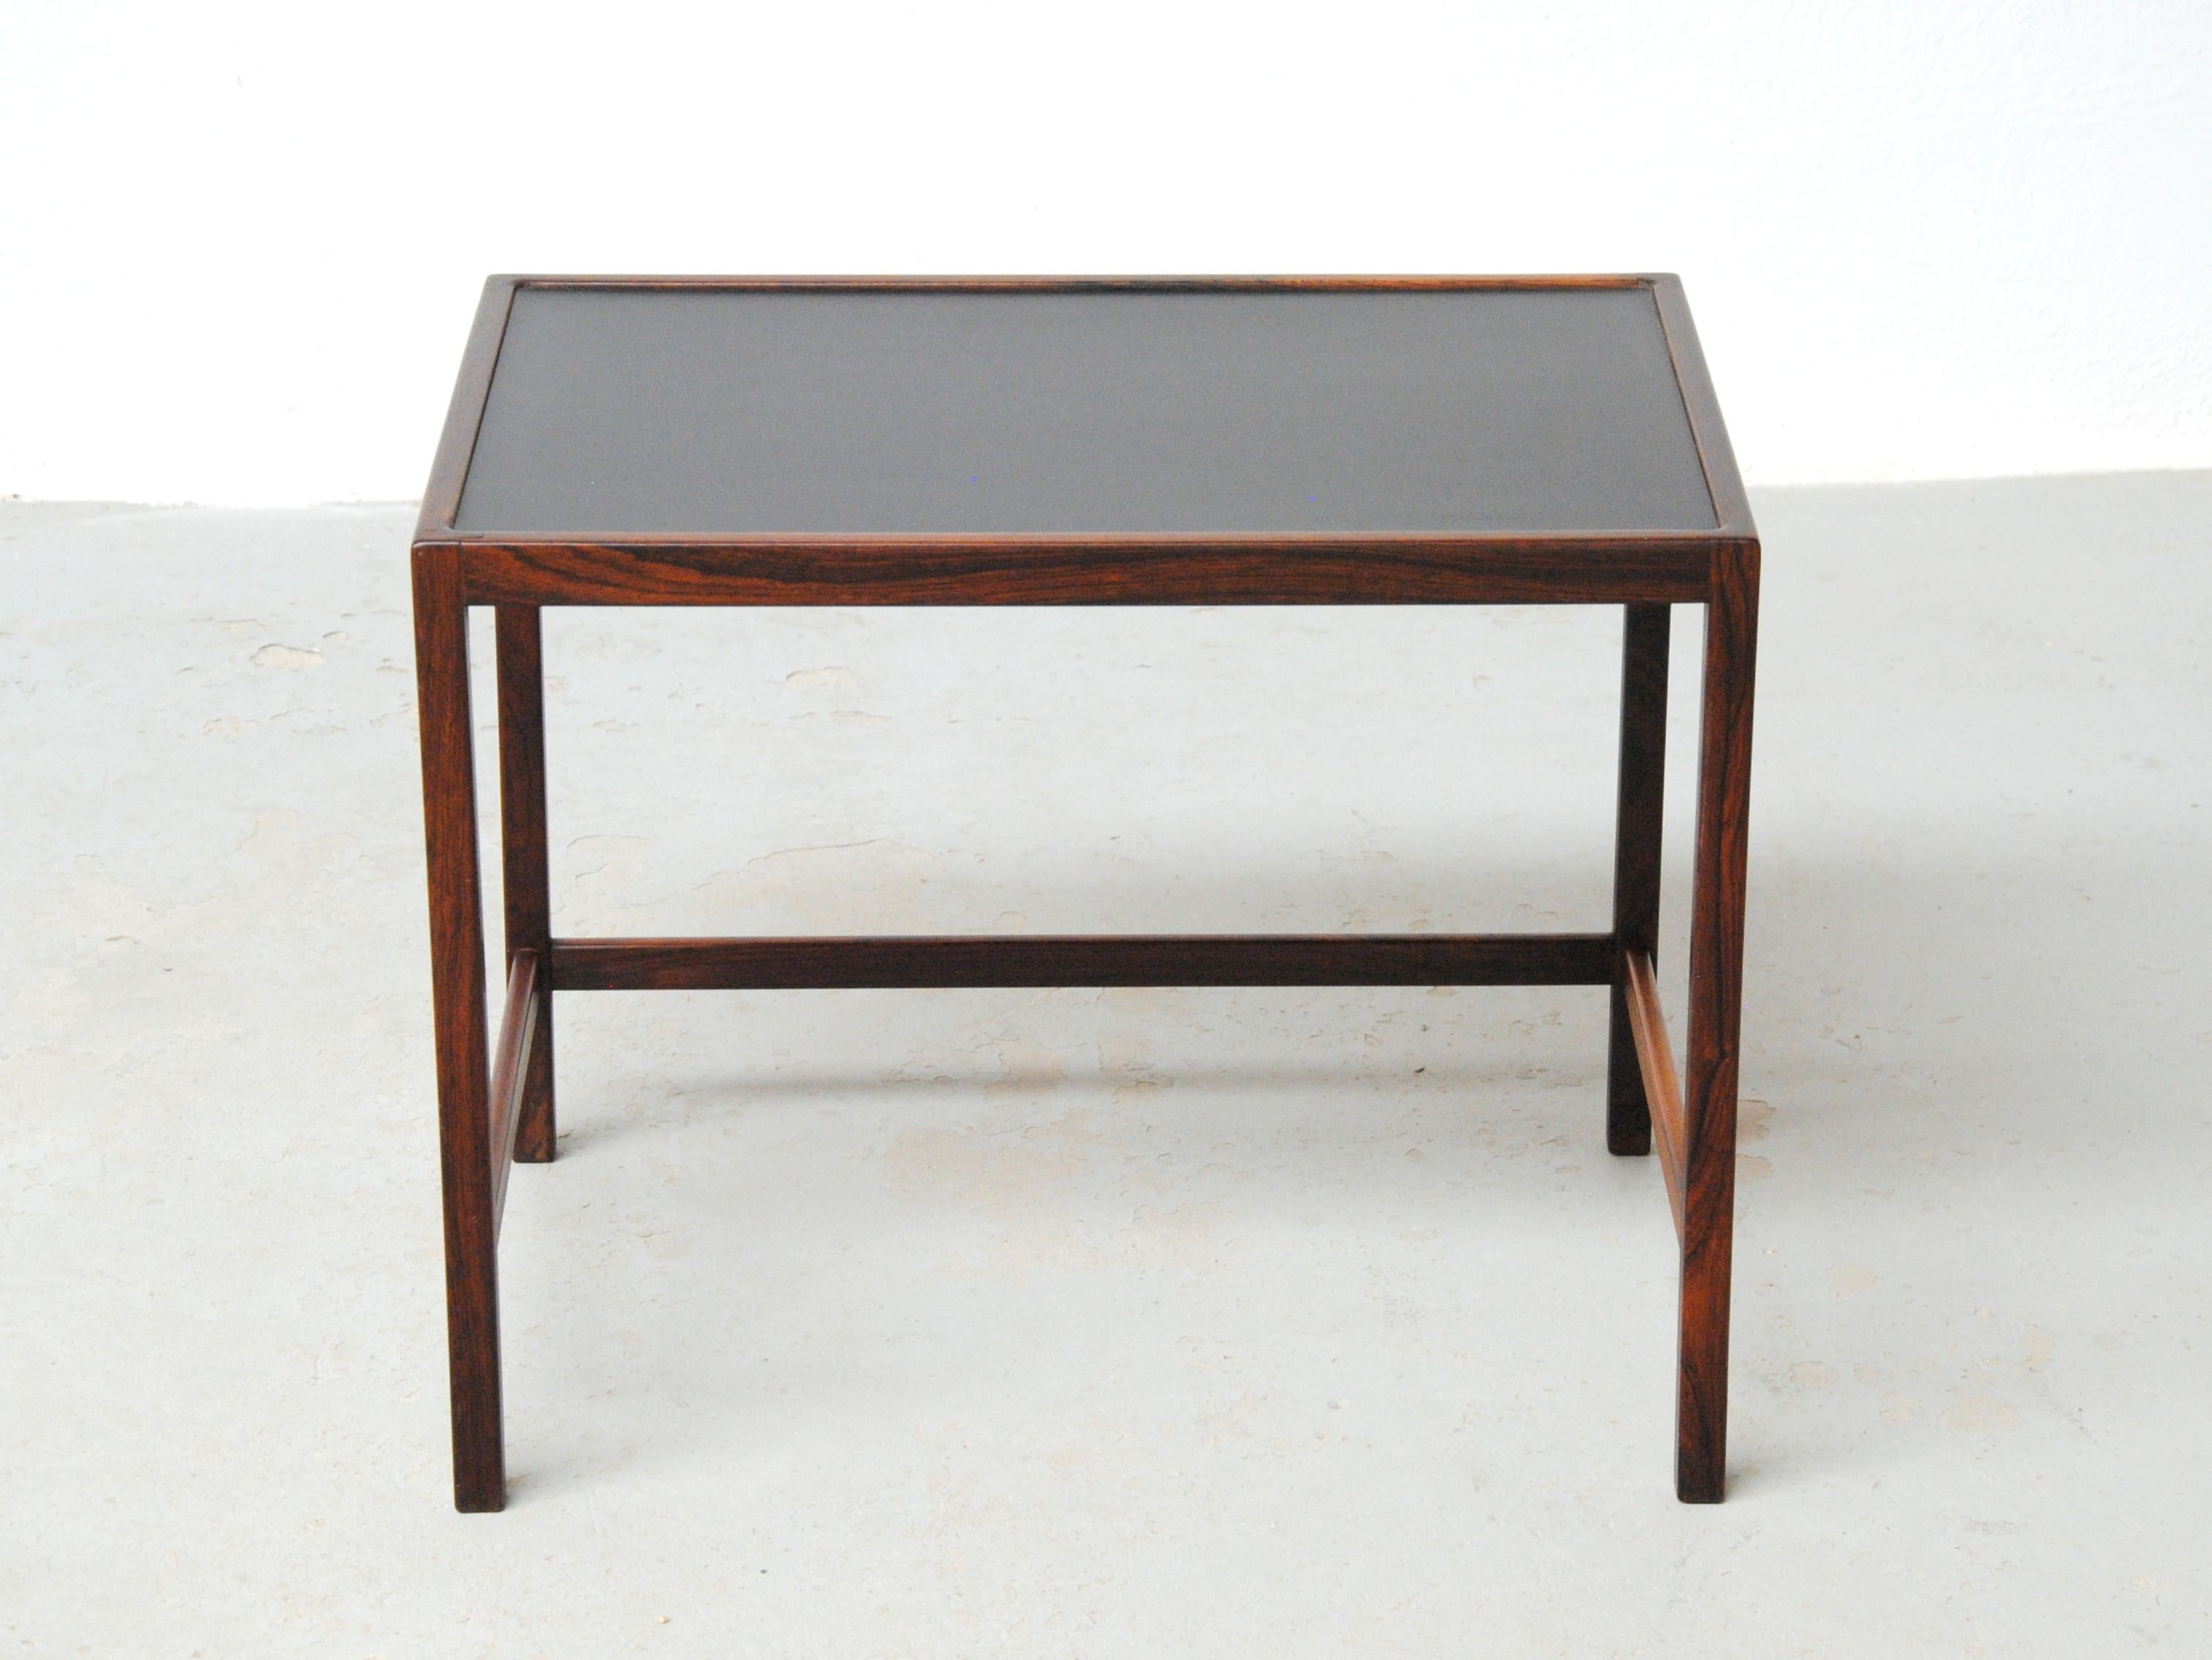 Danish Kurt Østervig 1960s side table by Jason Møbler.

Very well crafted small sidetable table with tabletop in black formica and frame in rosewood. 

The side table has been fully restored and refinished by our cabinetmaker to ensure that it´s